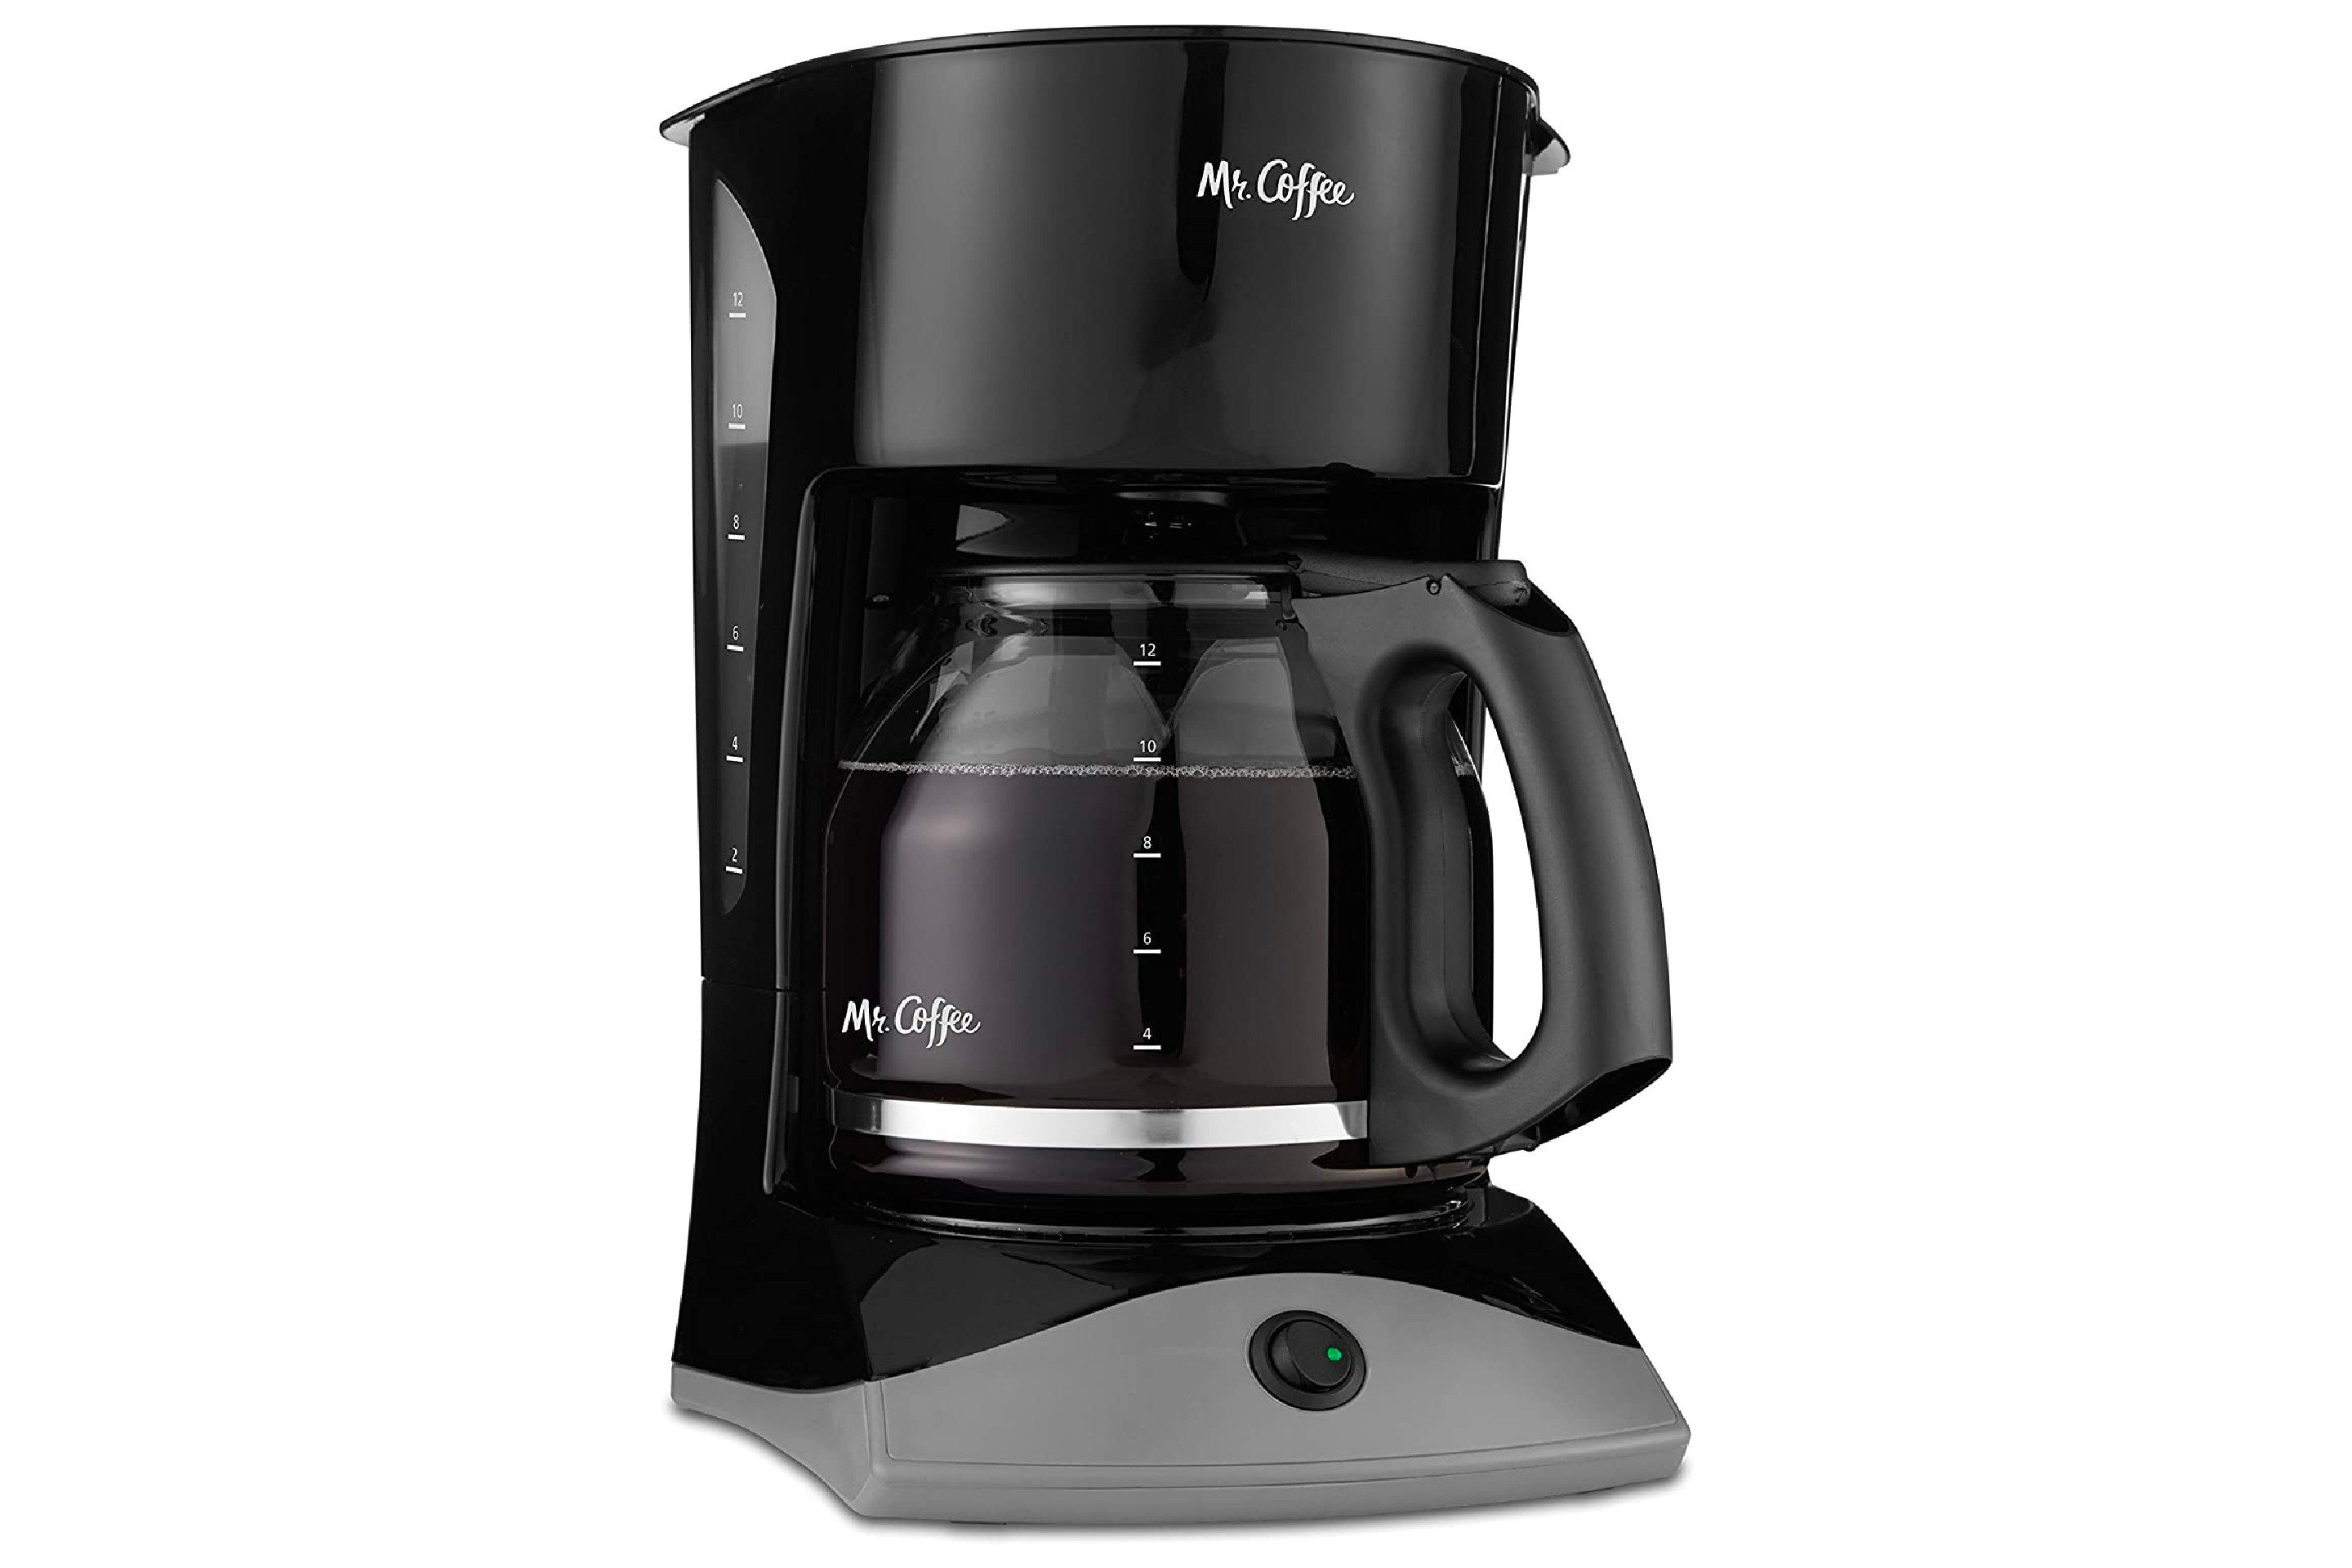 Mr. Coffee Maker with one press button